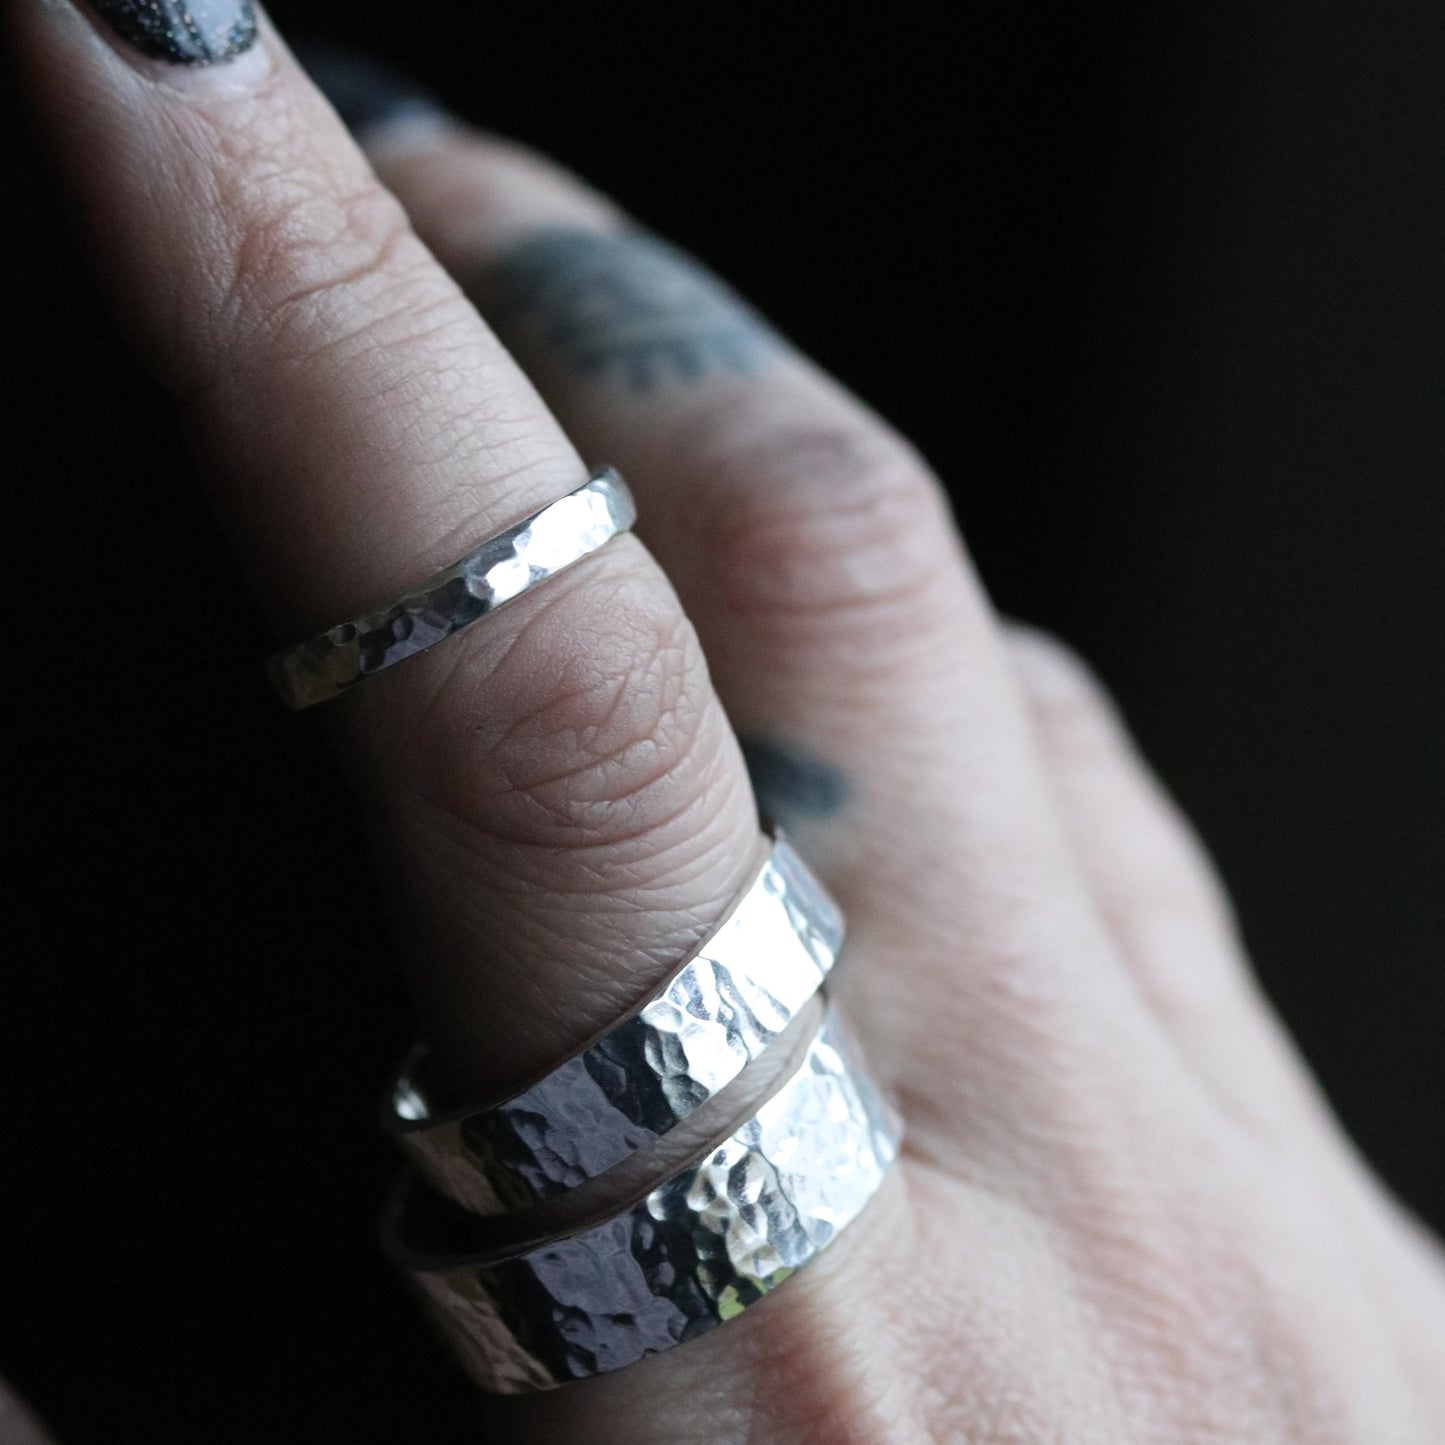 Sun 24th March - Hammered Ring 1/2 Day Class